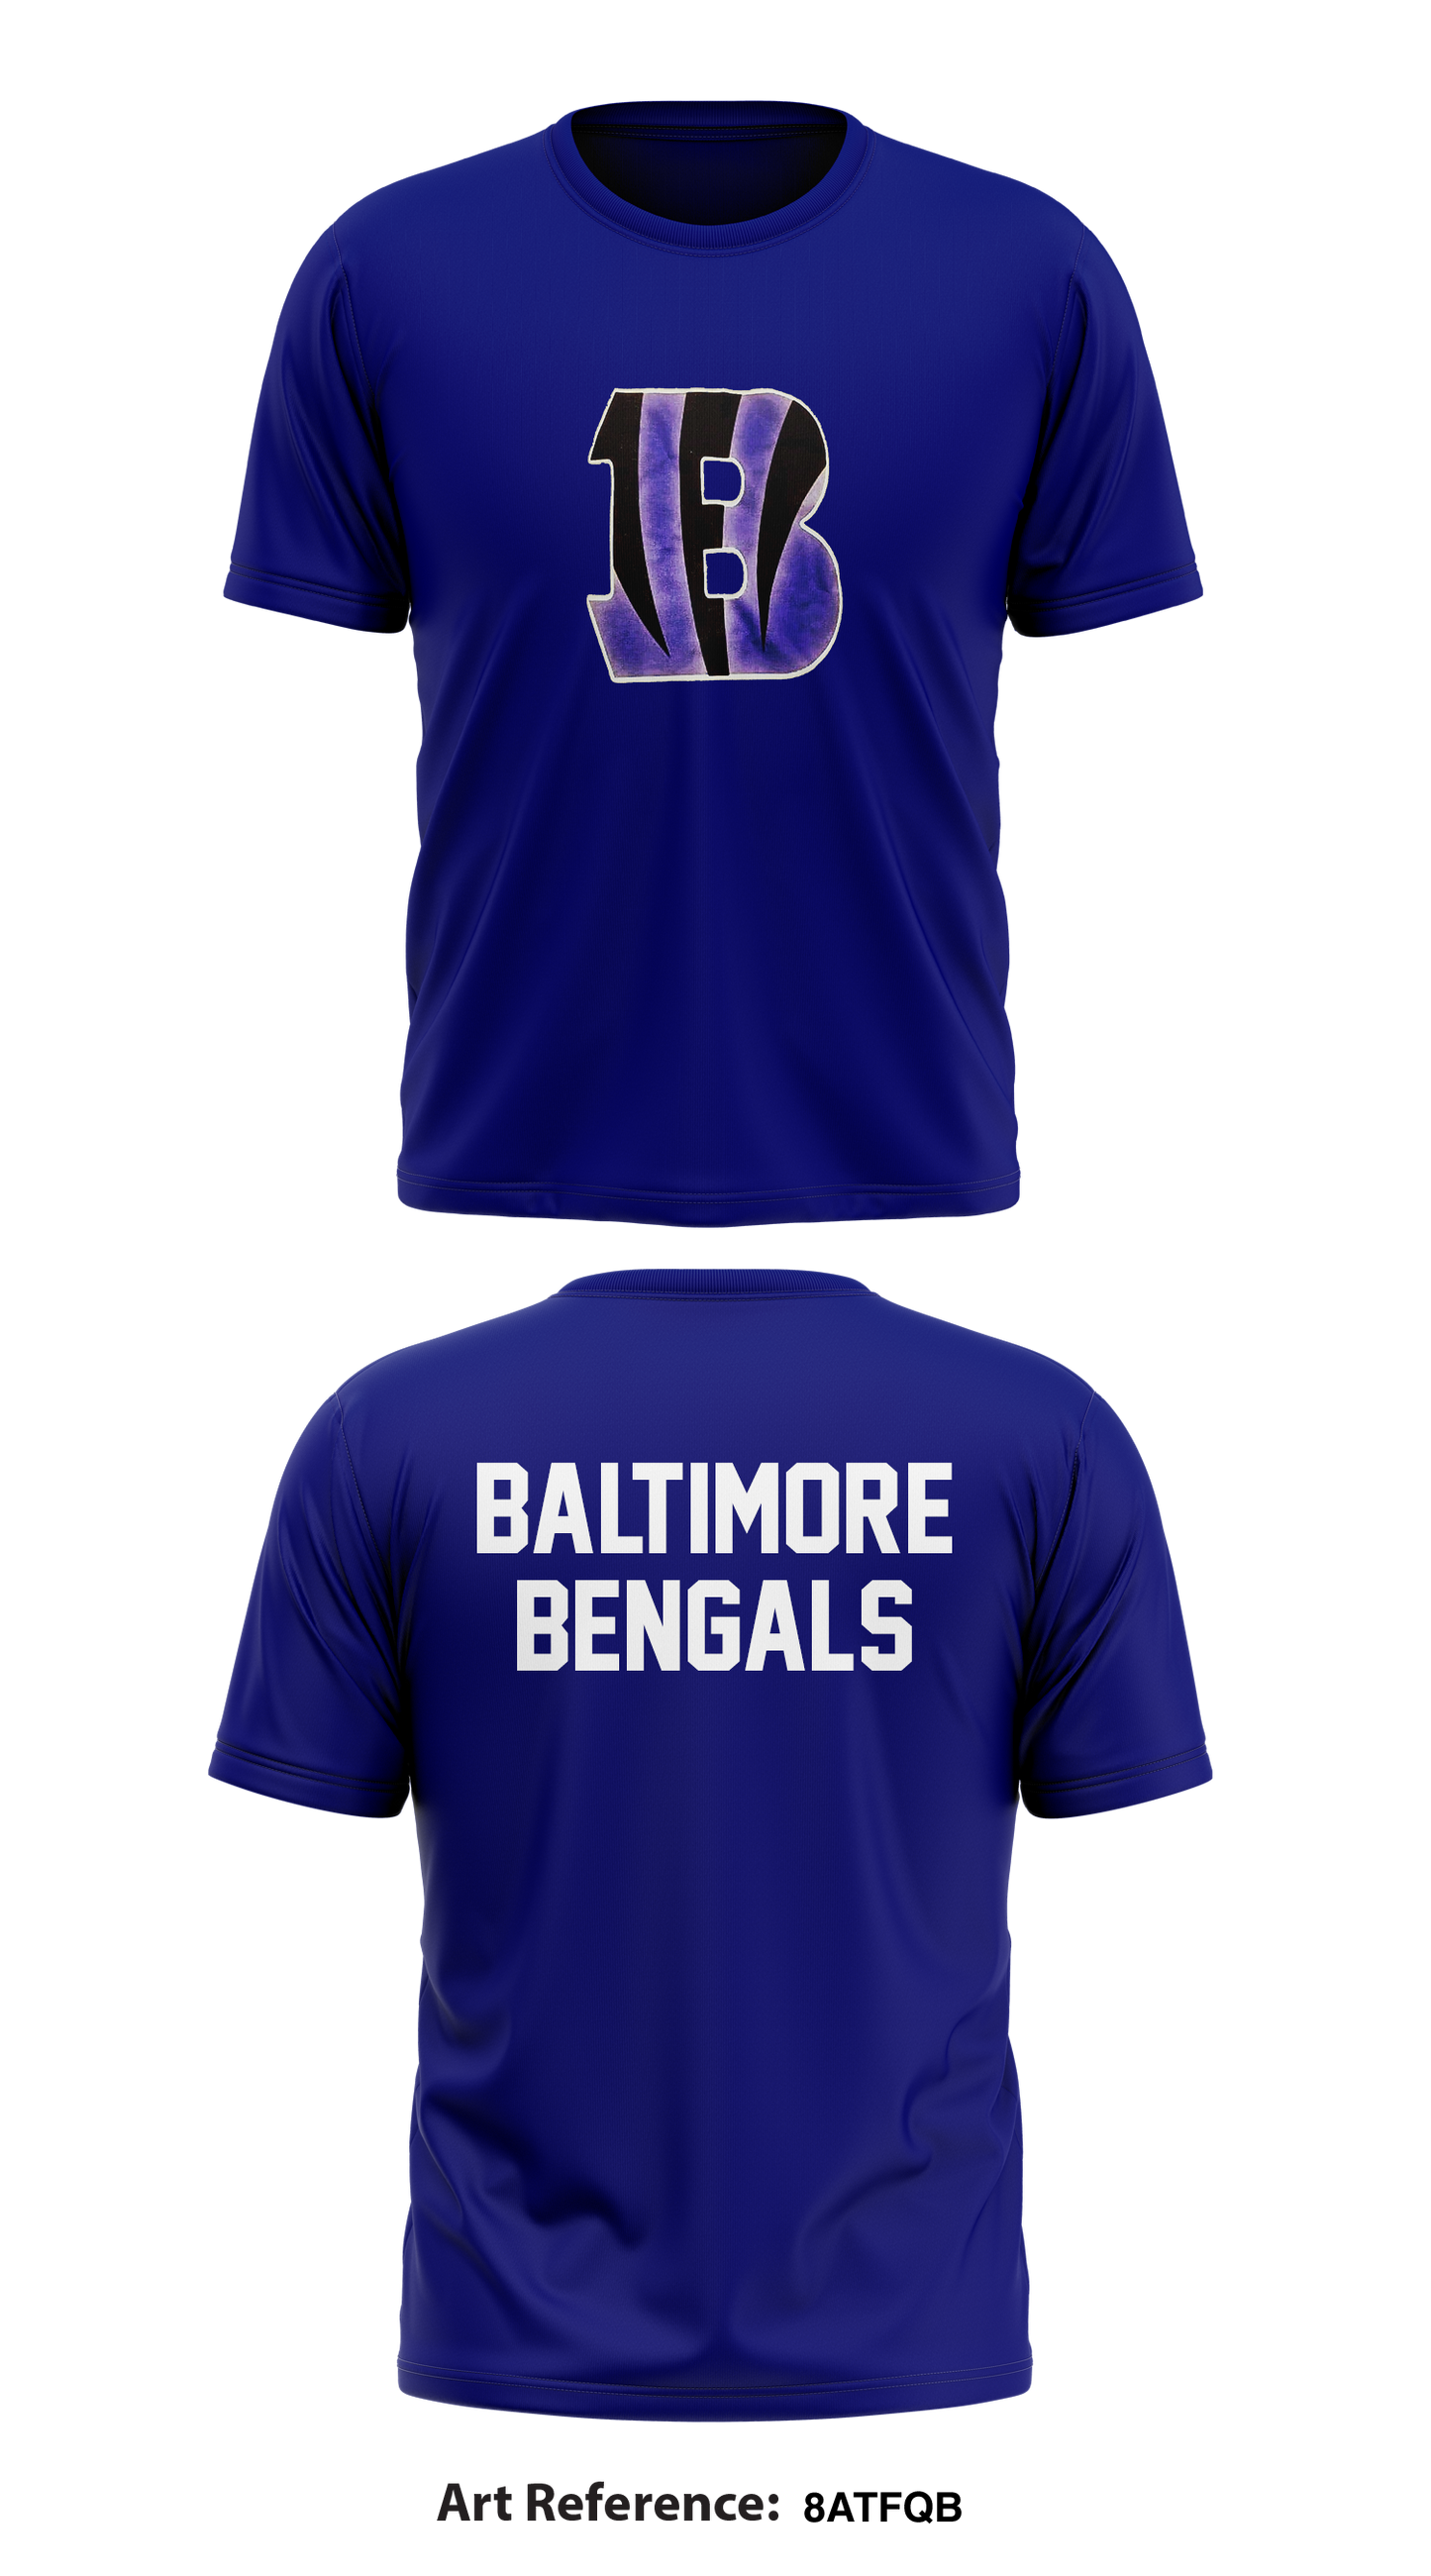 Baltimore Bengals Store 2 Core Men's SS Performance Tee - 8AtFqB